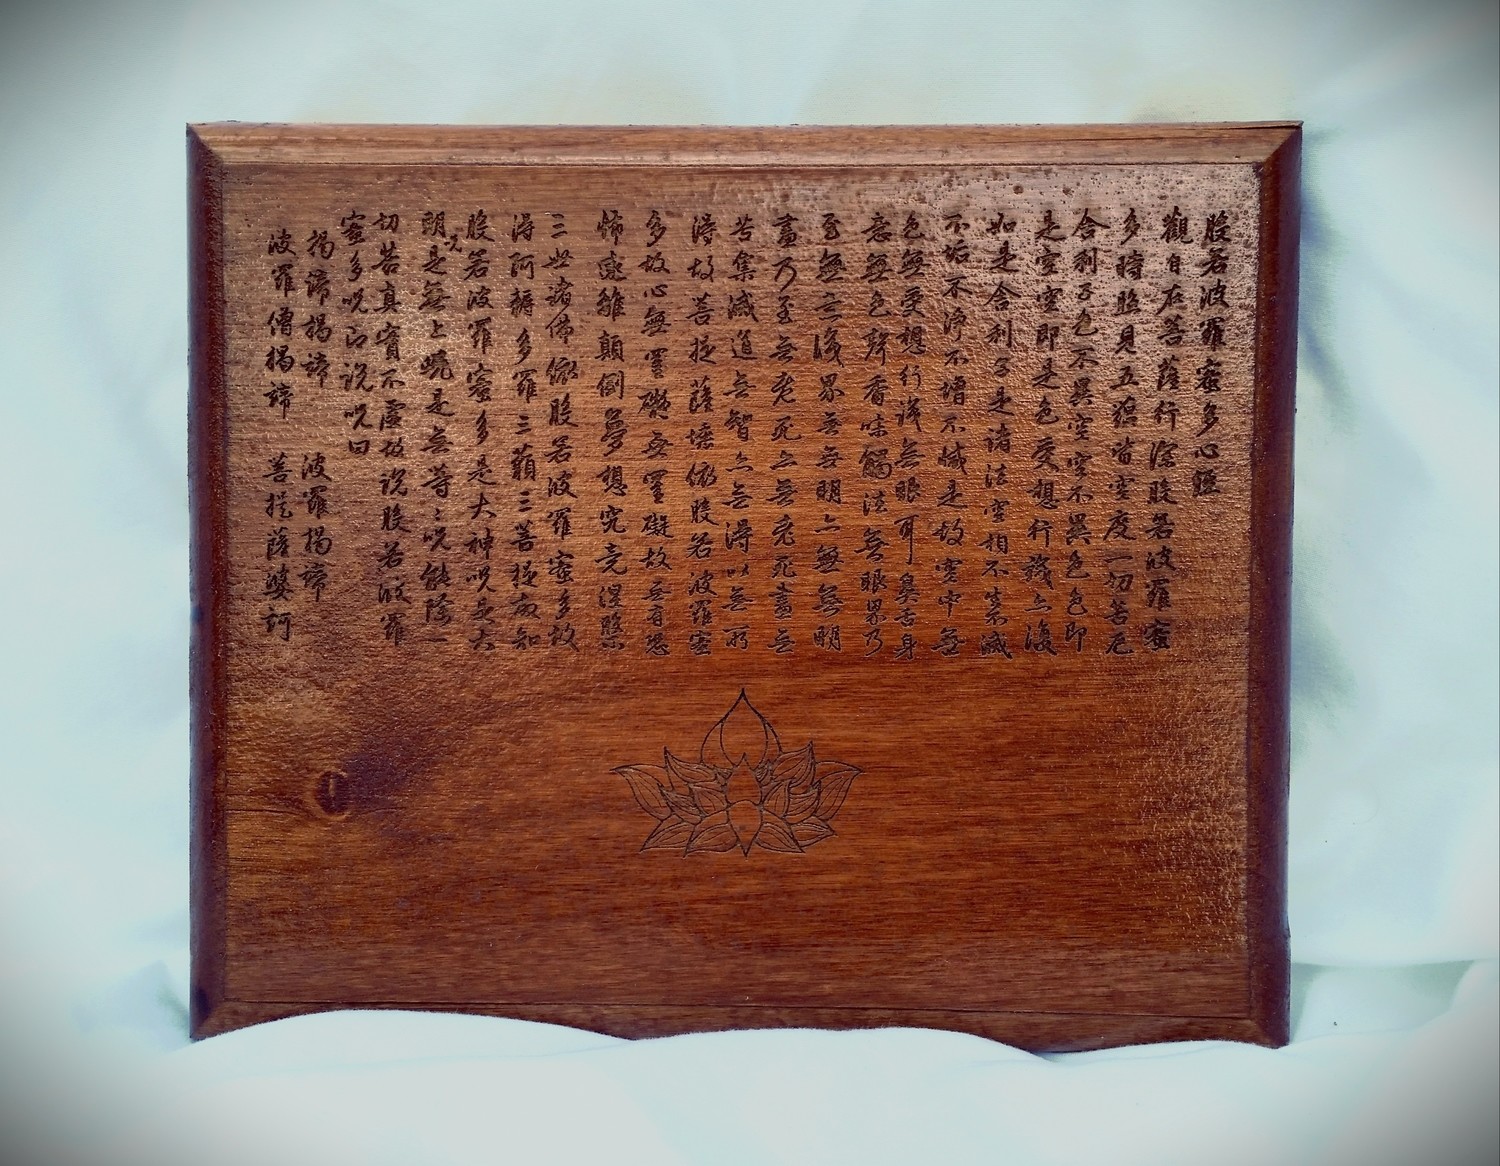 Heart Sutra Engraved on Wood